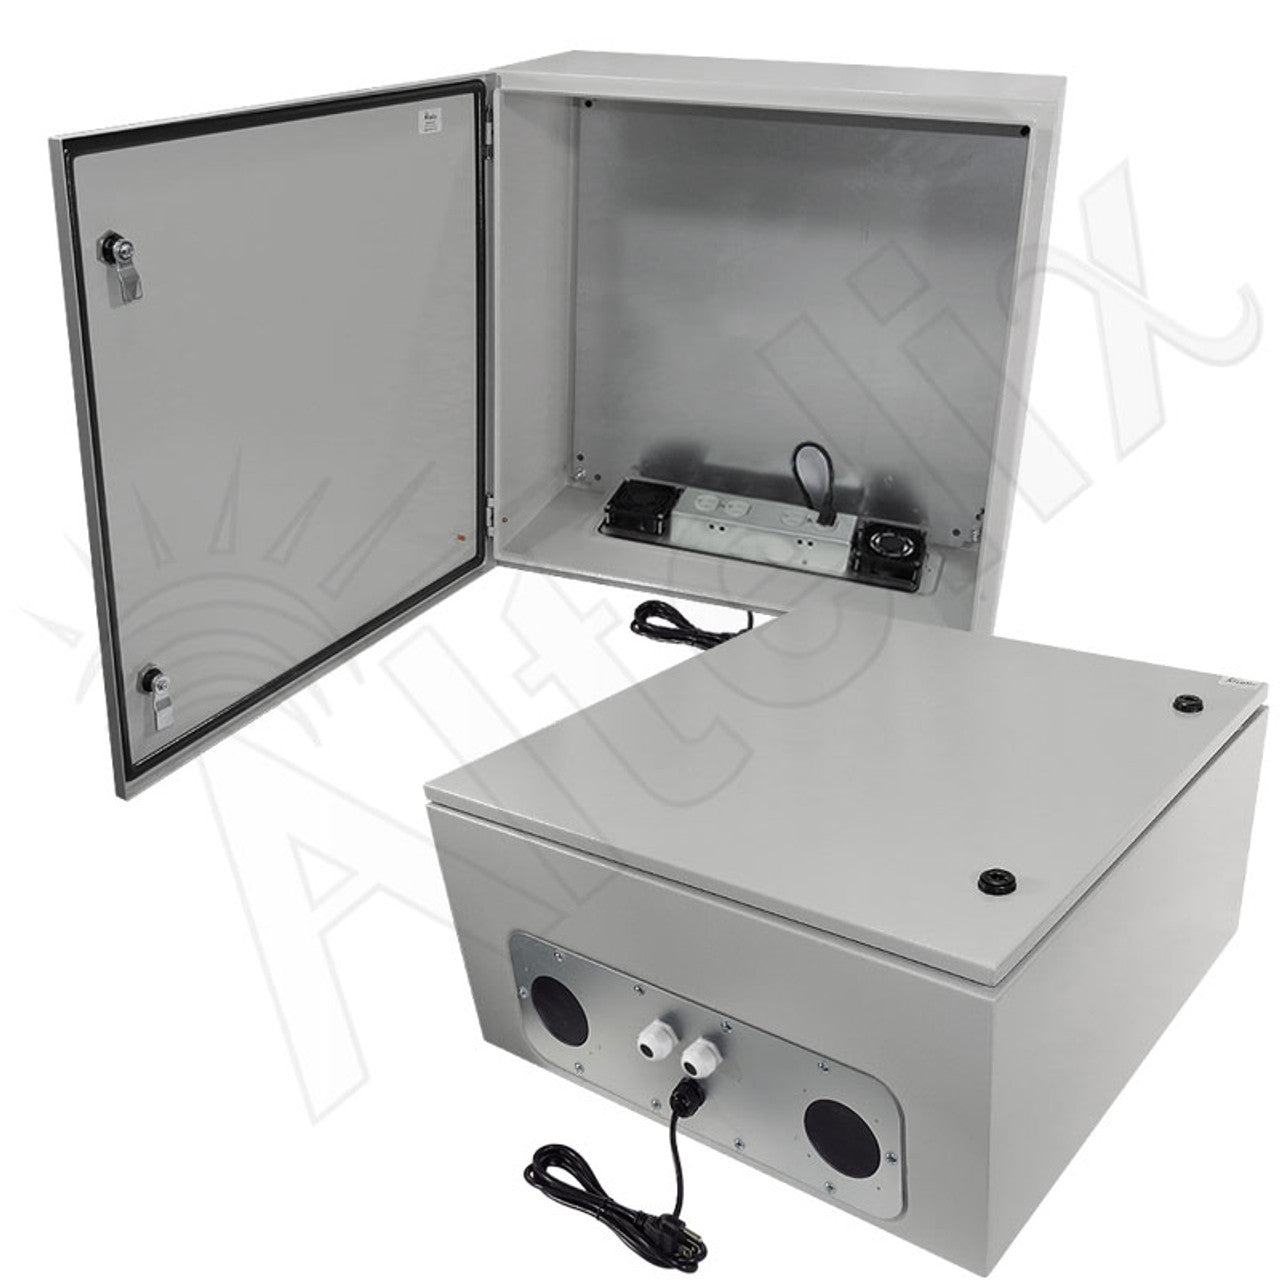 Altelix Steel Heated Weatherproof NEMA Enclosure with Dual Cooling Fans, 200W Heater, 120 VAC Outlets and Power Cord-6